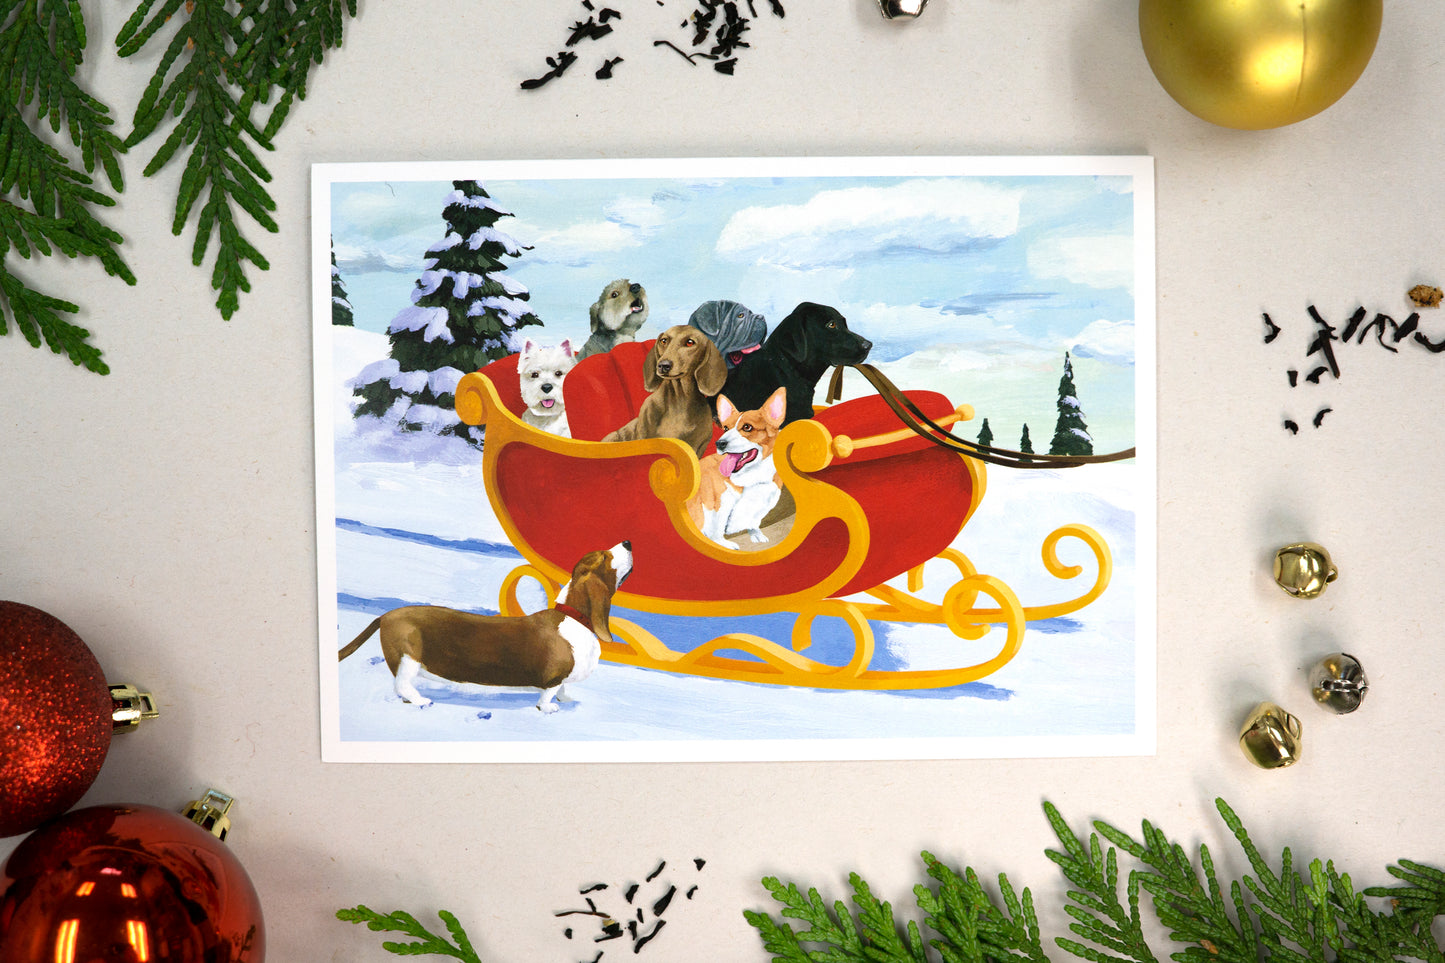 Dogs in Sled Holiday Card